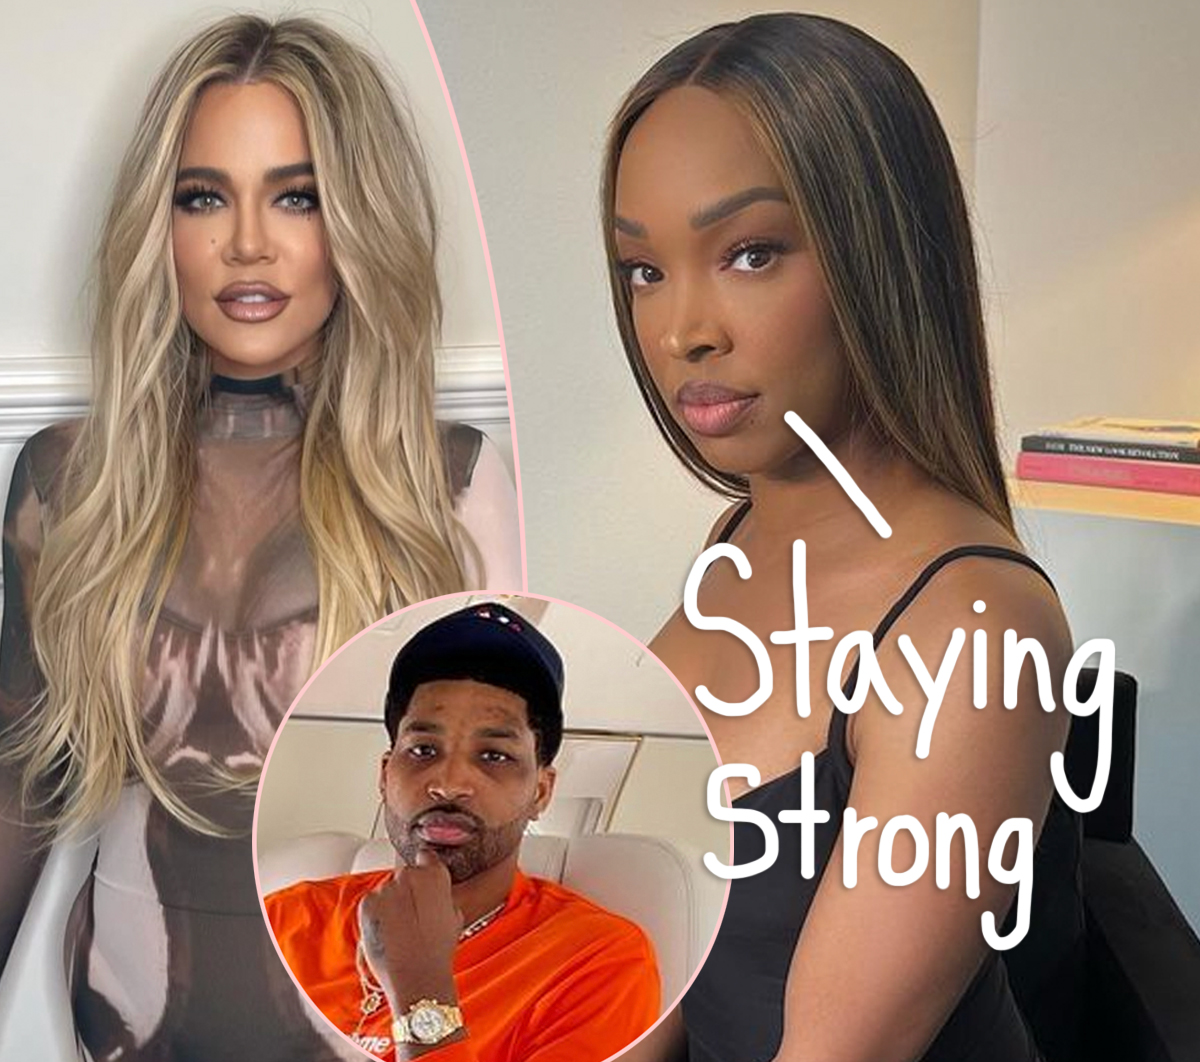 #Khloé Kardashian’s BFF Malika Haqq Shares Update On How Star Is Doing After Tristan Thompson Scandal, Says It ‘Stripped’ Away Her ‘Glory Times’